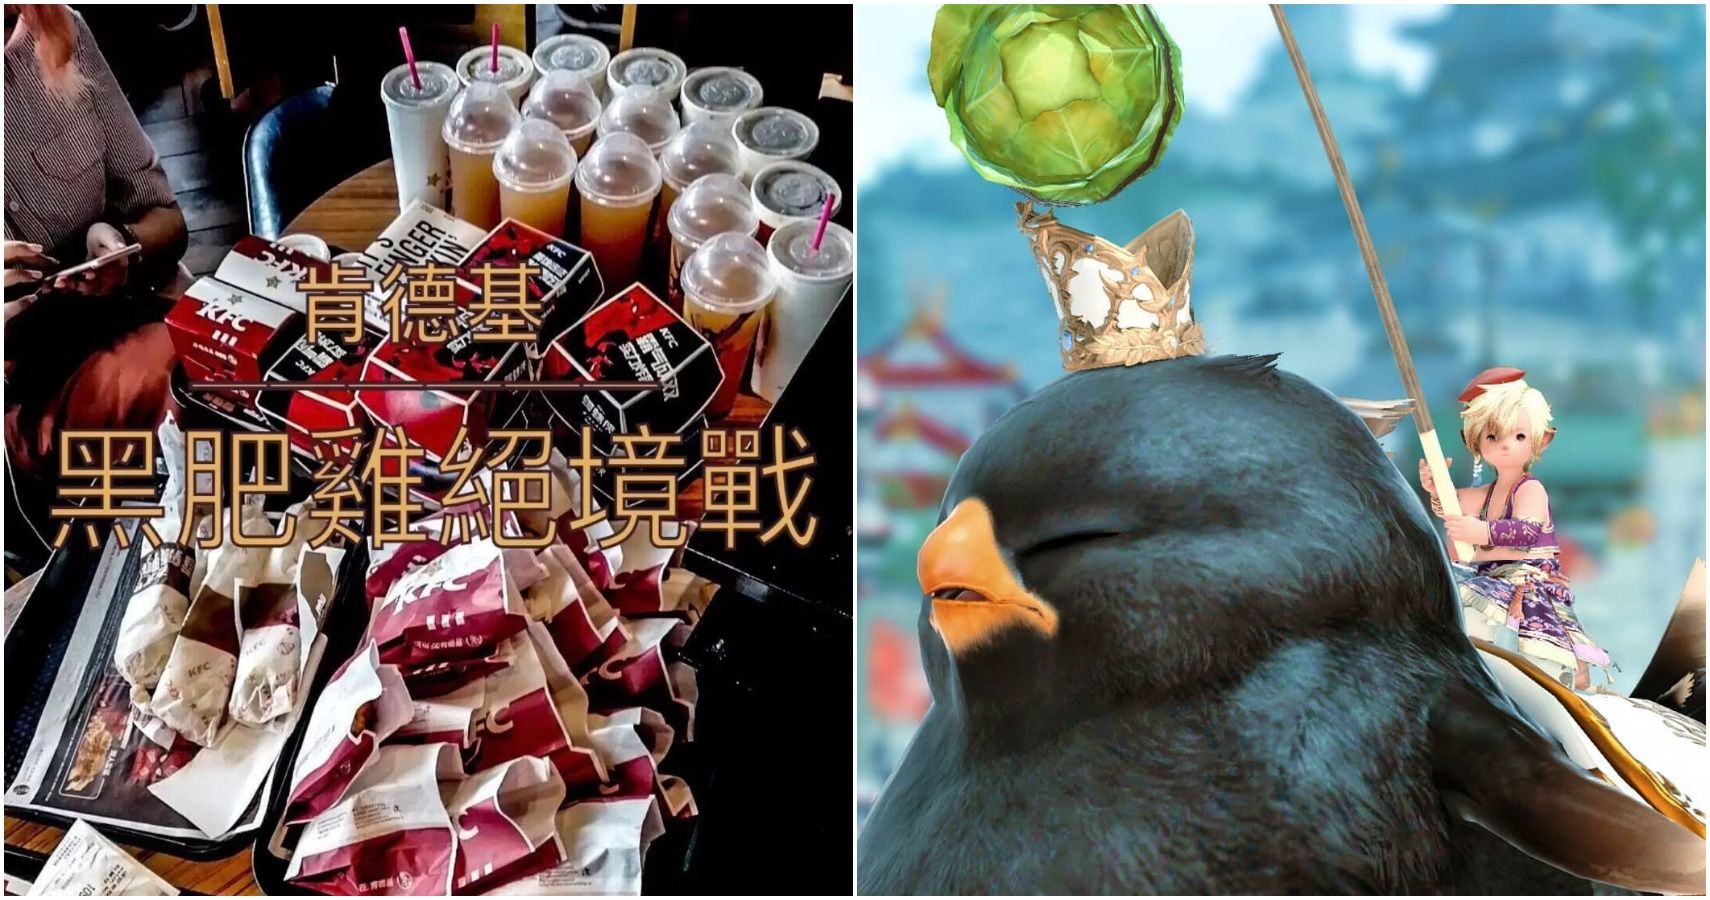 Chinese KFC Offers FF14 Chocobos To Players That Can Eat A Ludicrous Amount Of Chicken